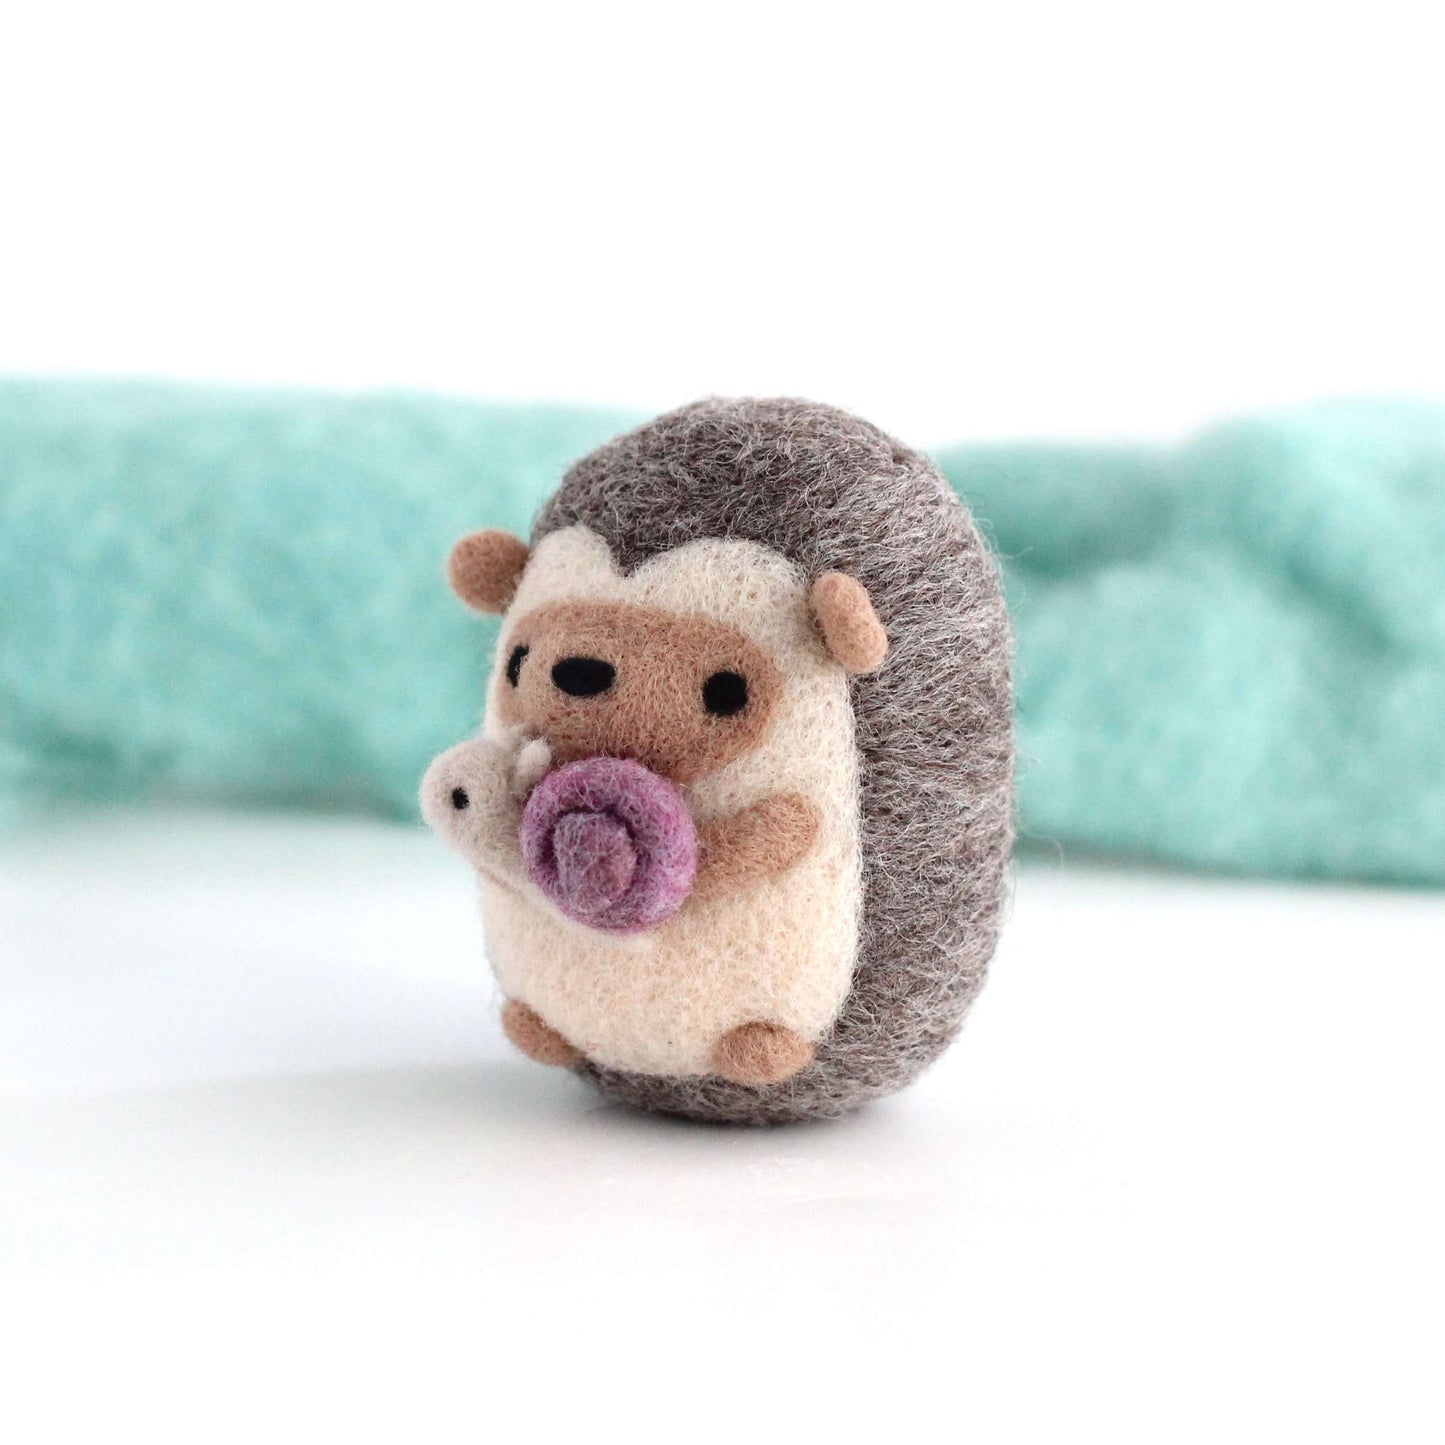 Needle Felted Hedgehog holding Snail by Wild Whimsy Woolies